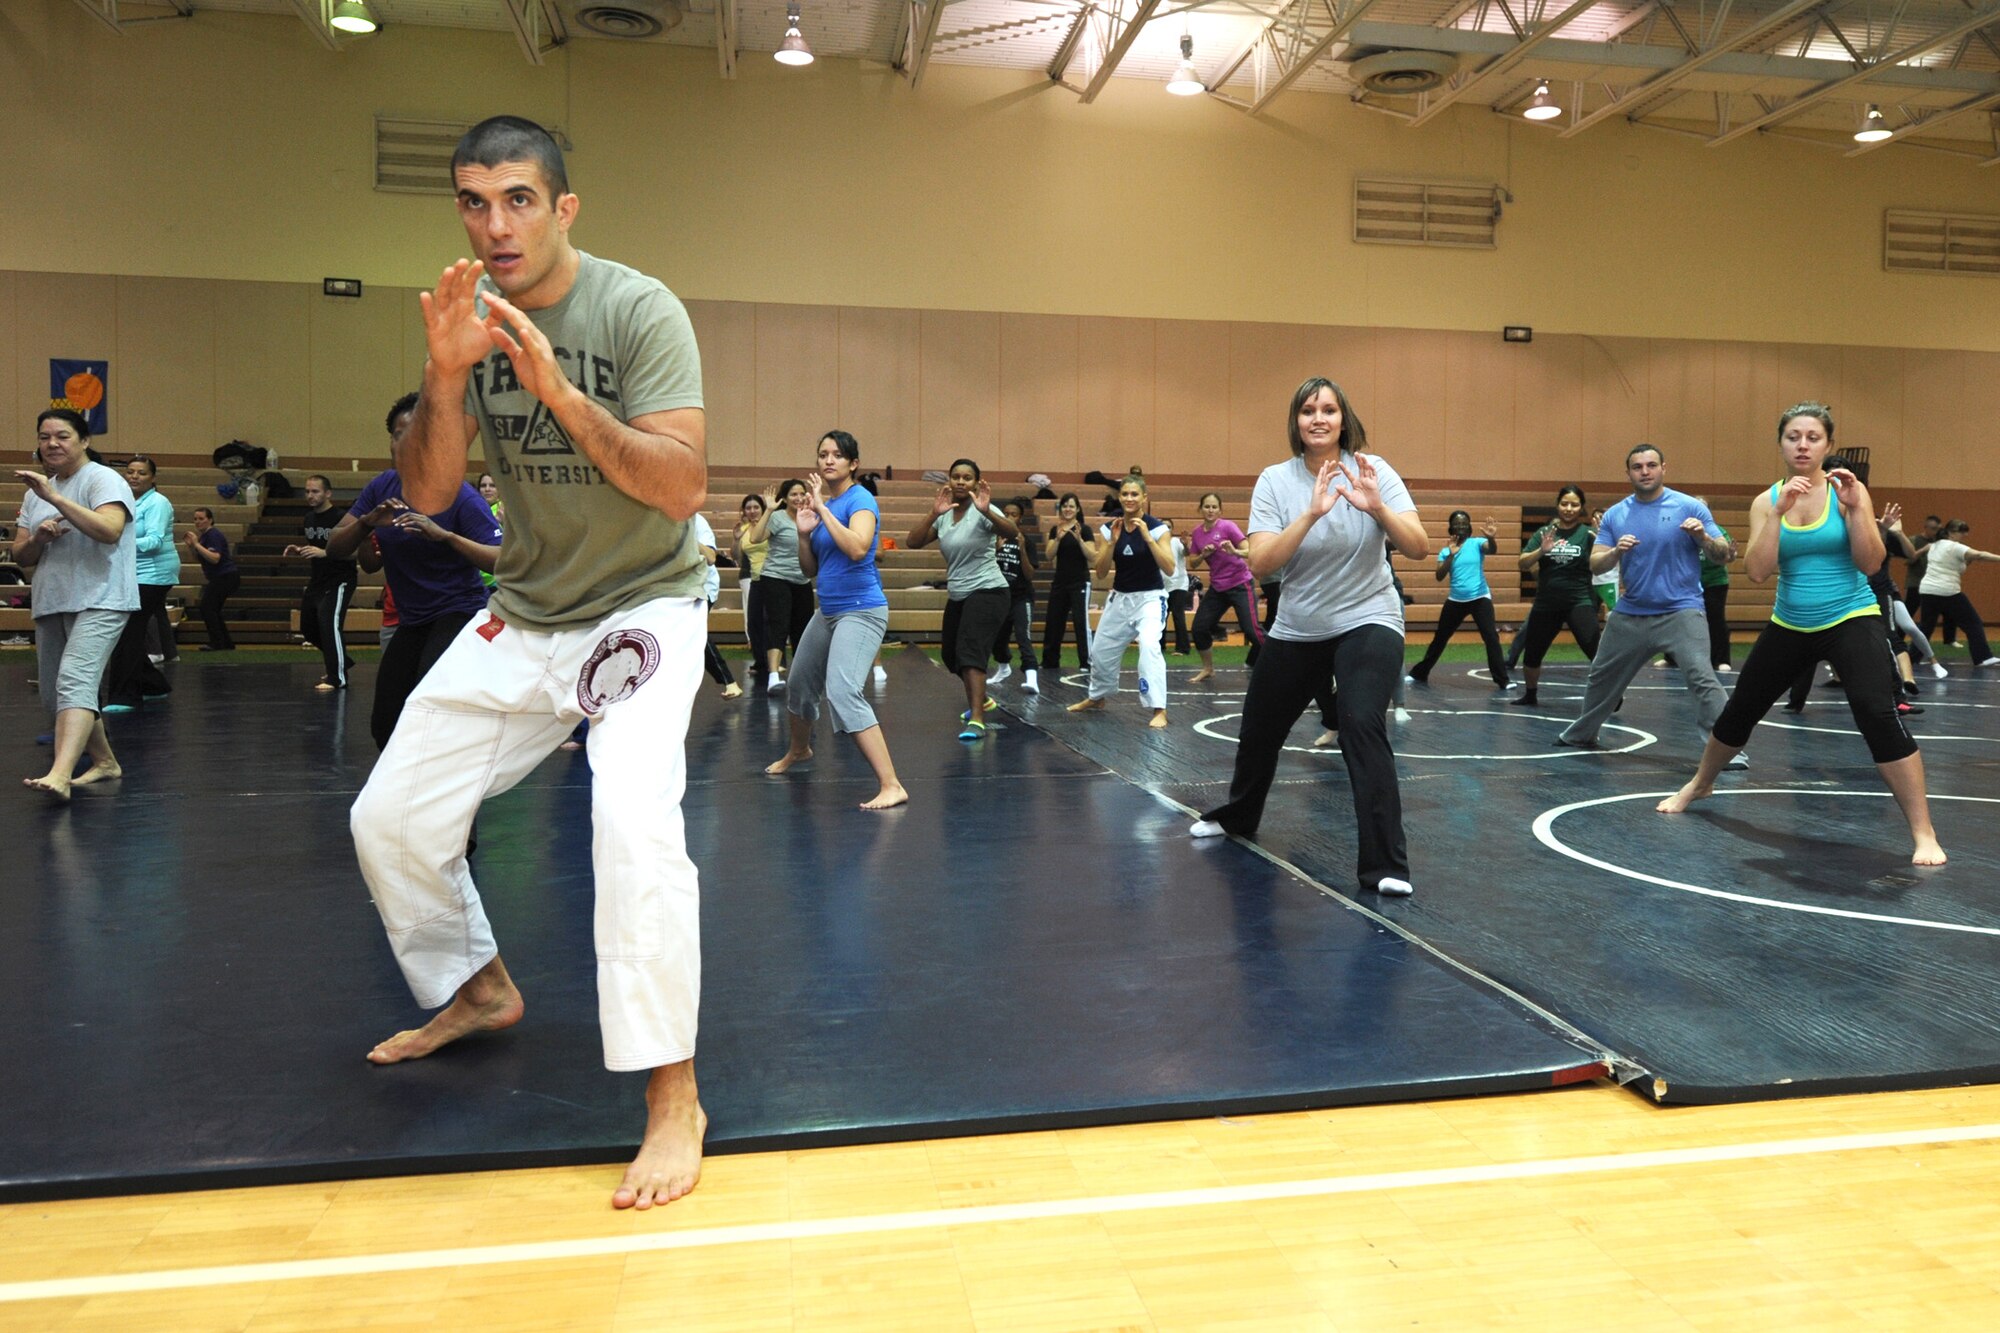 Rener Gracie demonstrates a combat base pose during the Gracie Academy Women Empowered self-defense seminar Nov. 11, 2013, at the fitness center in Malmstrom Air Force Base, Mont. The weeklong self-defense seminar trained nearly 100 participants to become certified instructors. Gracie is a Gracie Academy Women Empowered self-defense seminar instructor.
